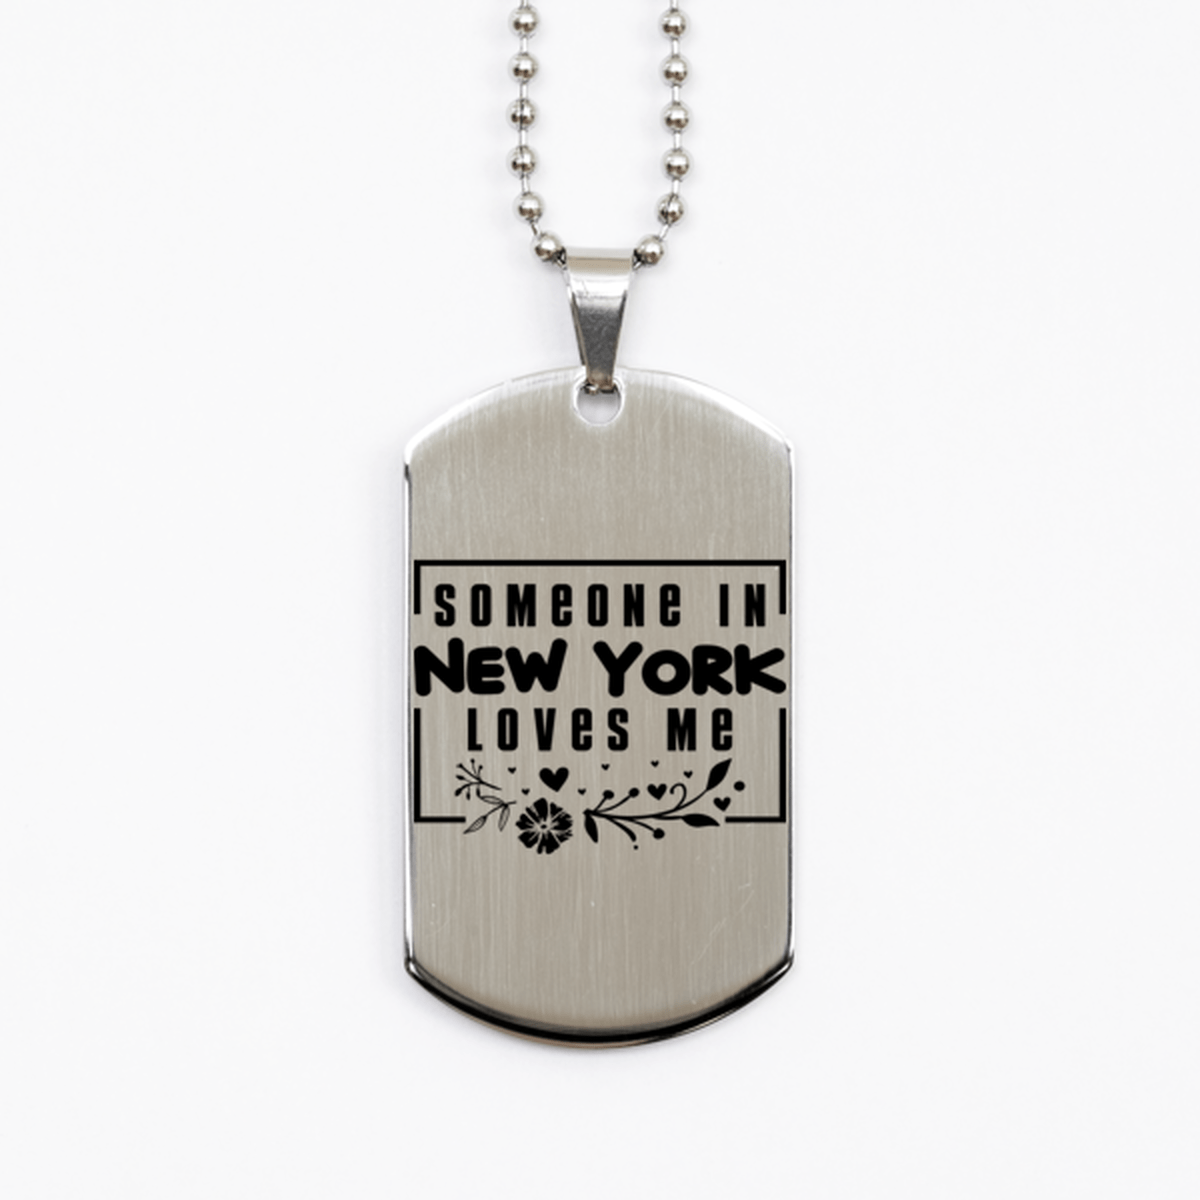 Cute New York Silver Dog Tag Necklace, Someone in New York Loves Me, Best Birthday Gifts from New York Friends & Family